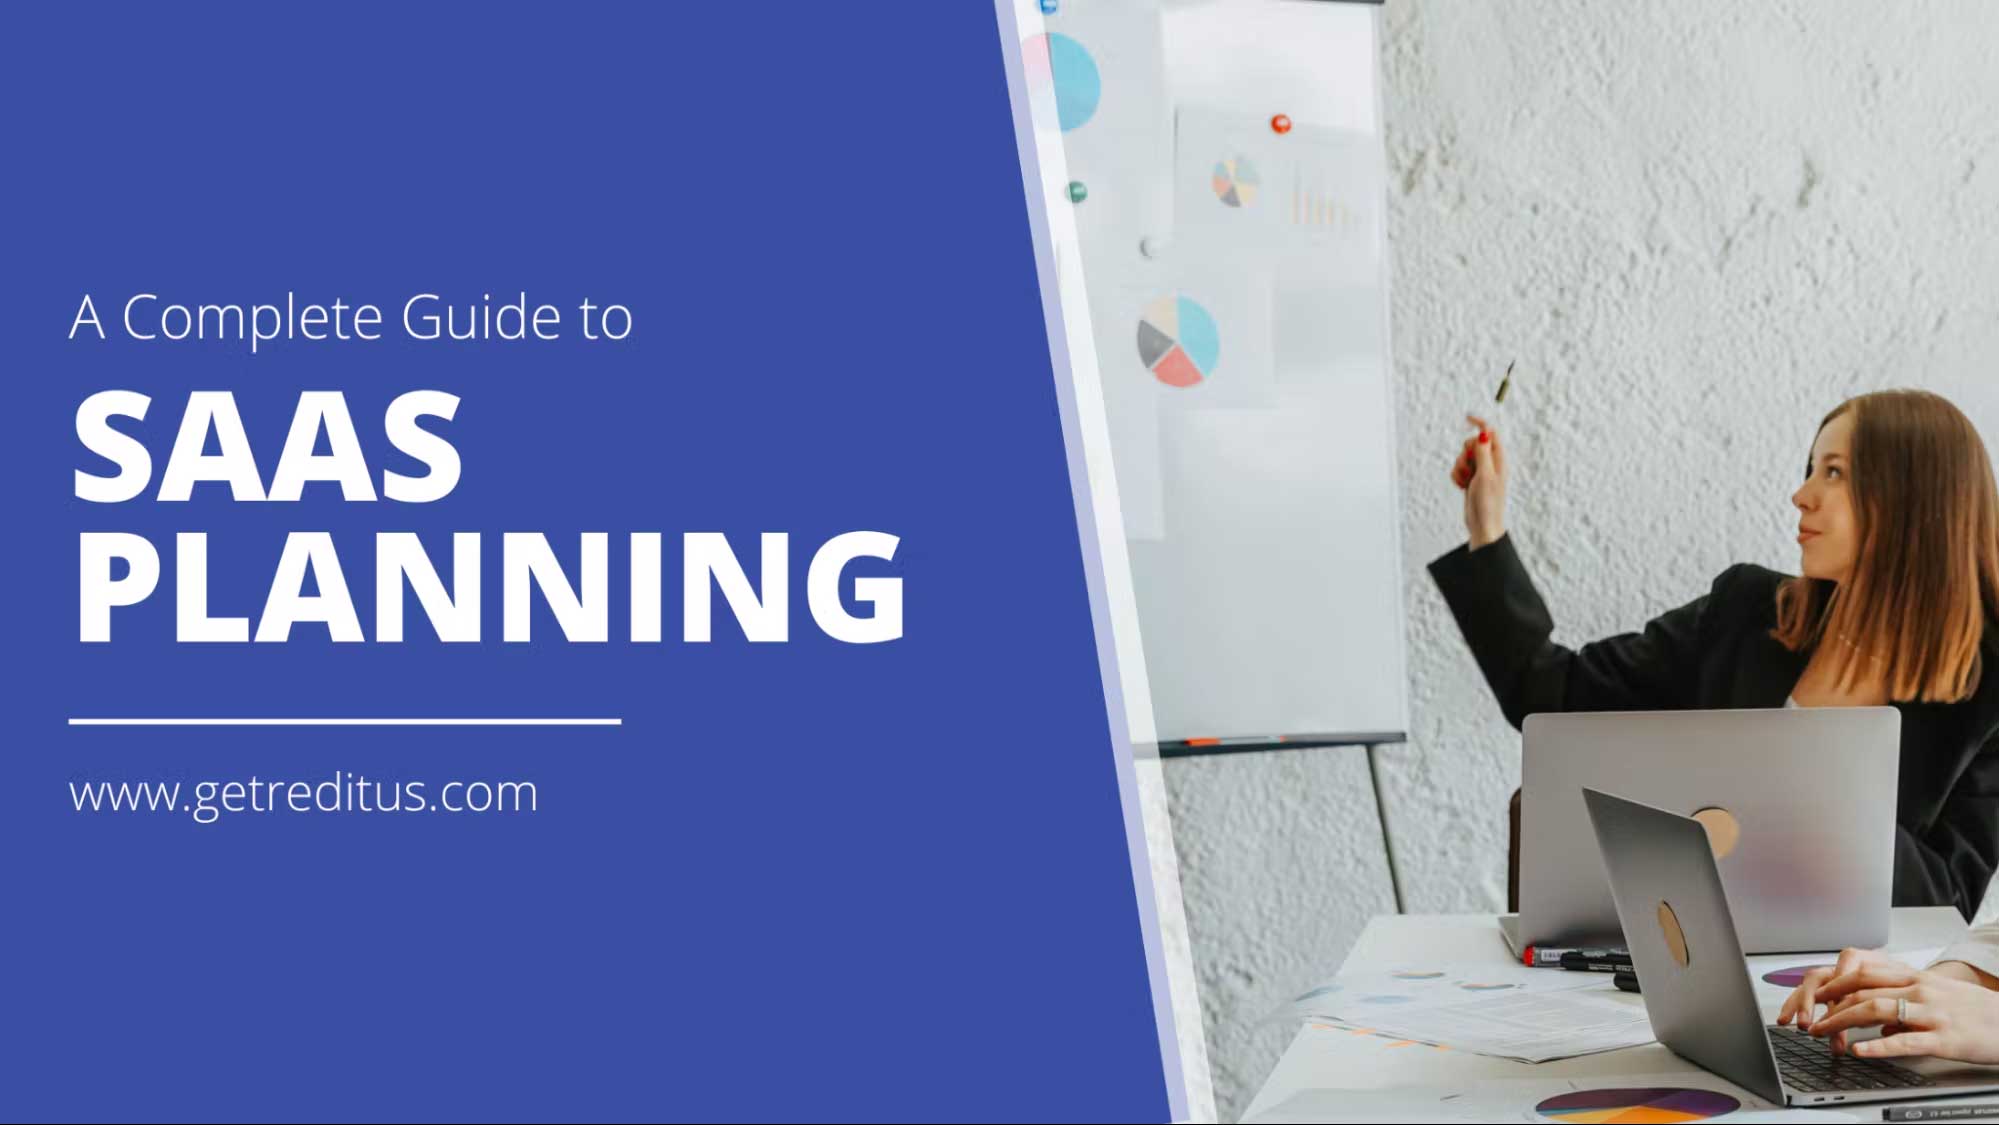 SaaS Planning: How To Plan Your Next Year for Perfection